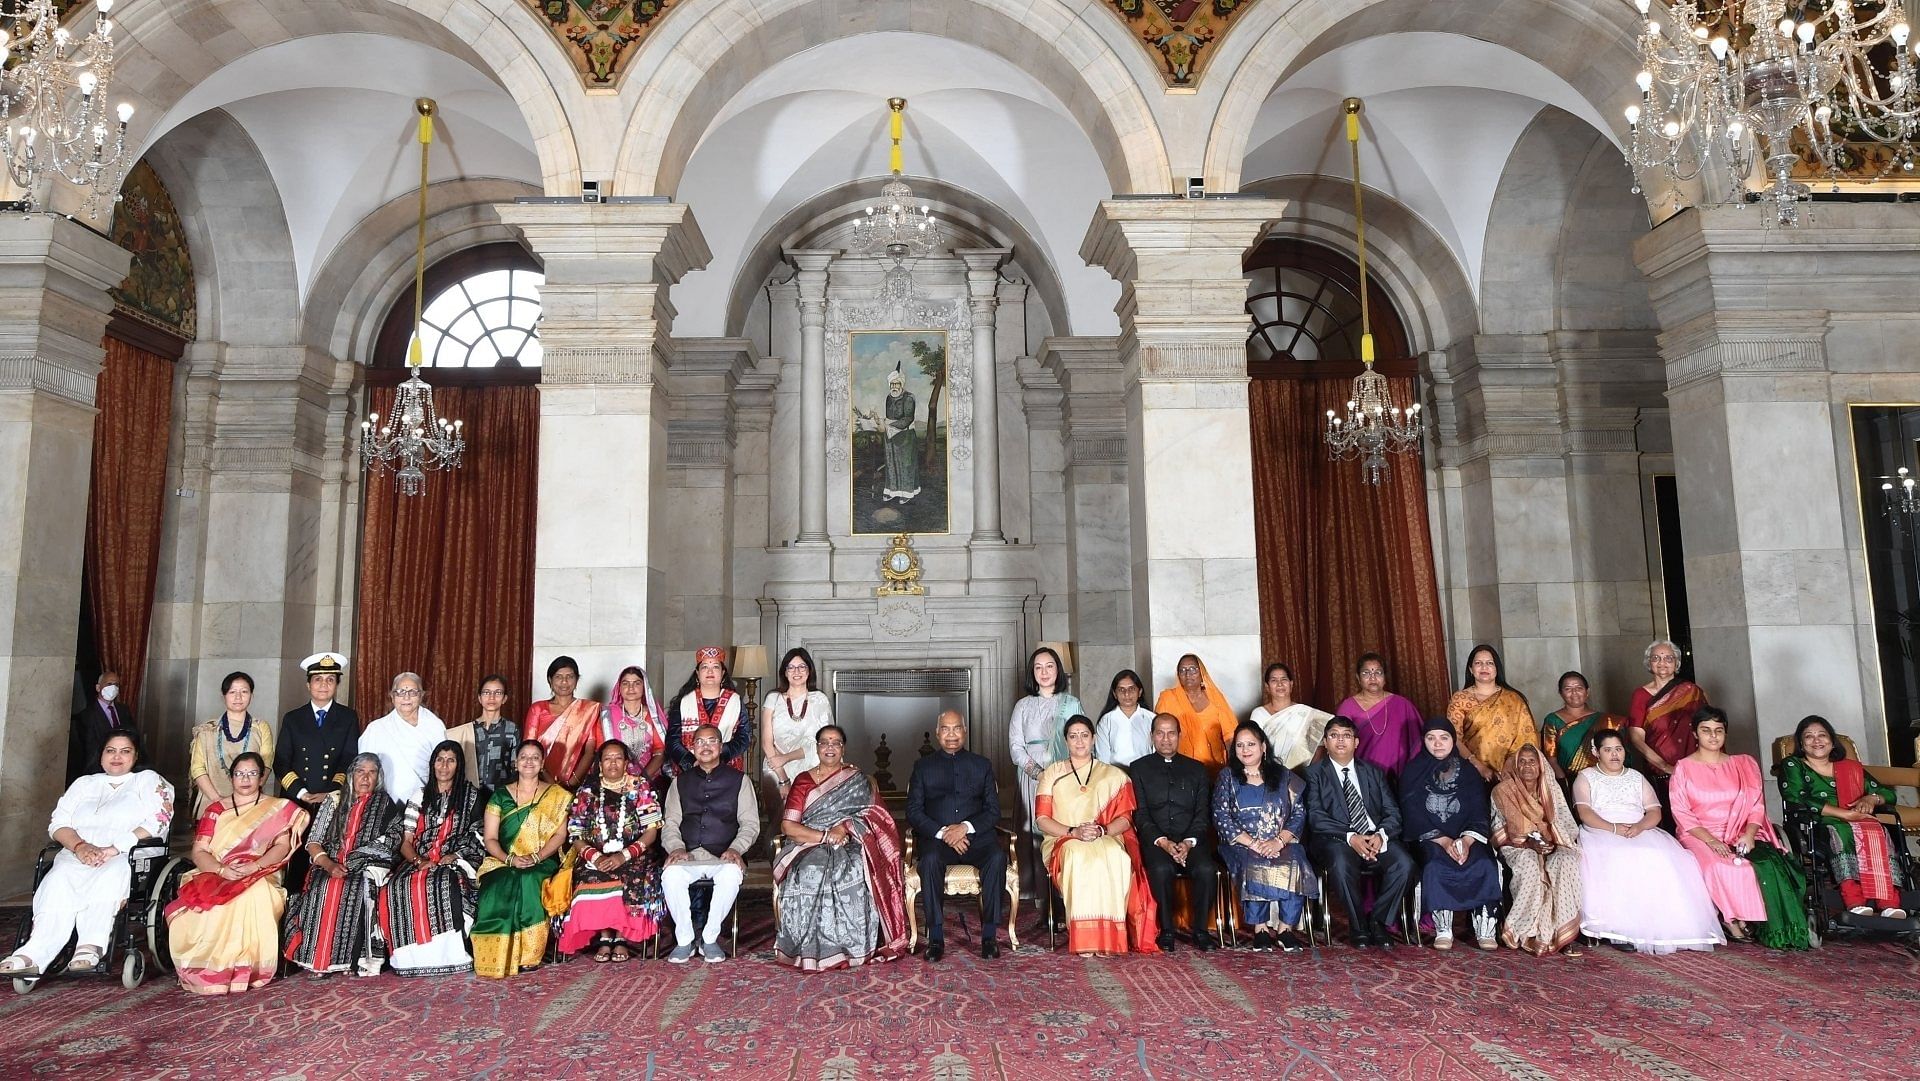 President Ram Nath Kovind with the recipients of Nari Shakti Puraskar for the years 2020 and 2021 on the occasion of International Women's Day, at Rashtrapati Bhawan in New Delhi. Credit: Twitter/ @rashtrapatibhvn